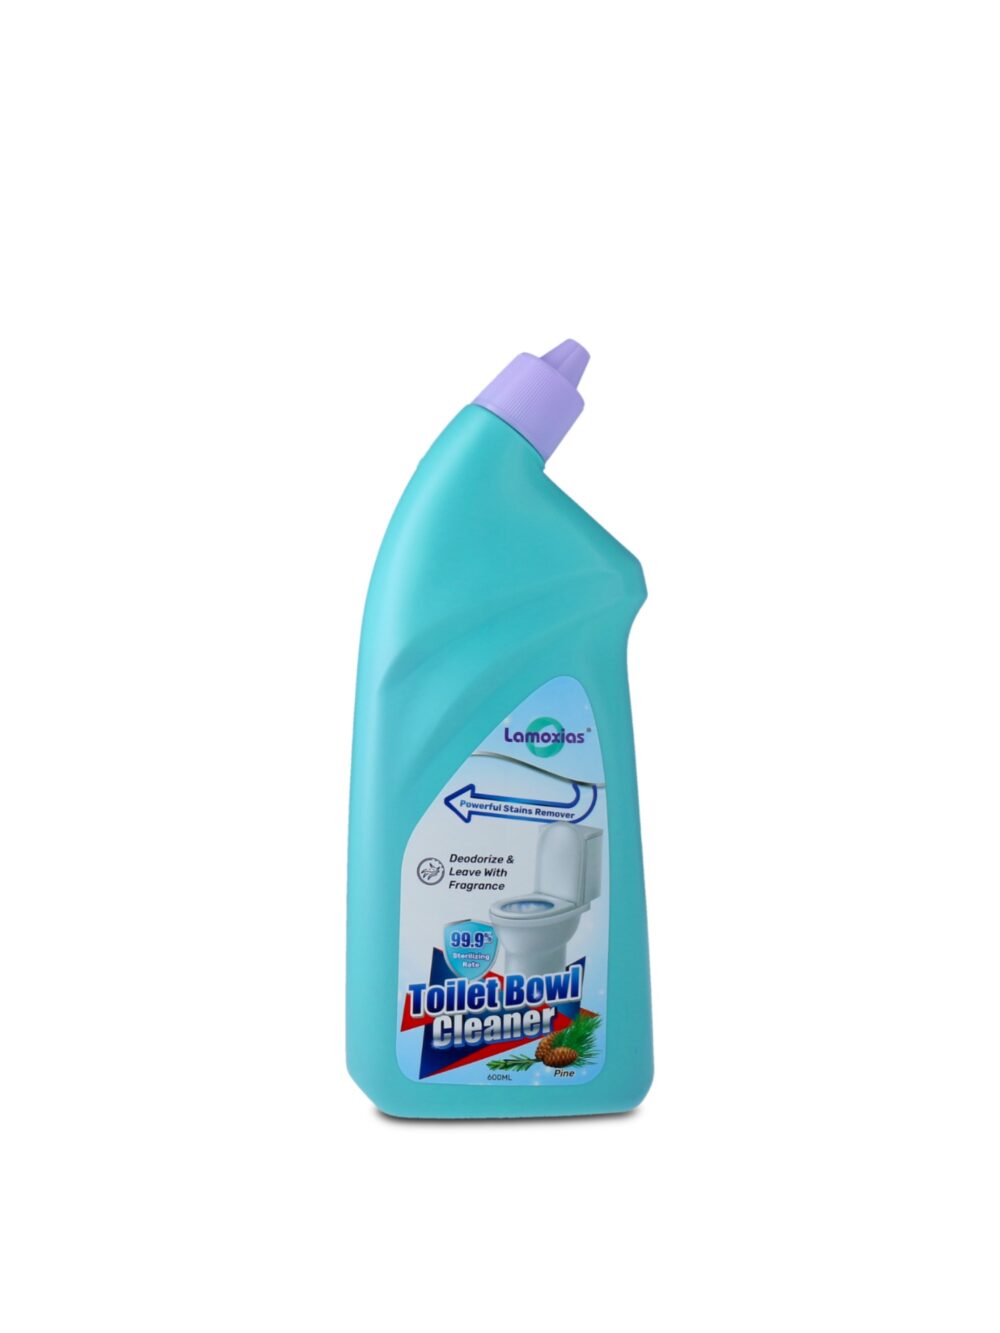 The toilet bowl cleaner that is a necessity in the household. Cleans and disinfects 99.9% of germs and bacteria for every toilet bowl in the house